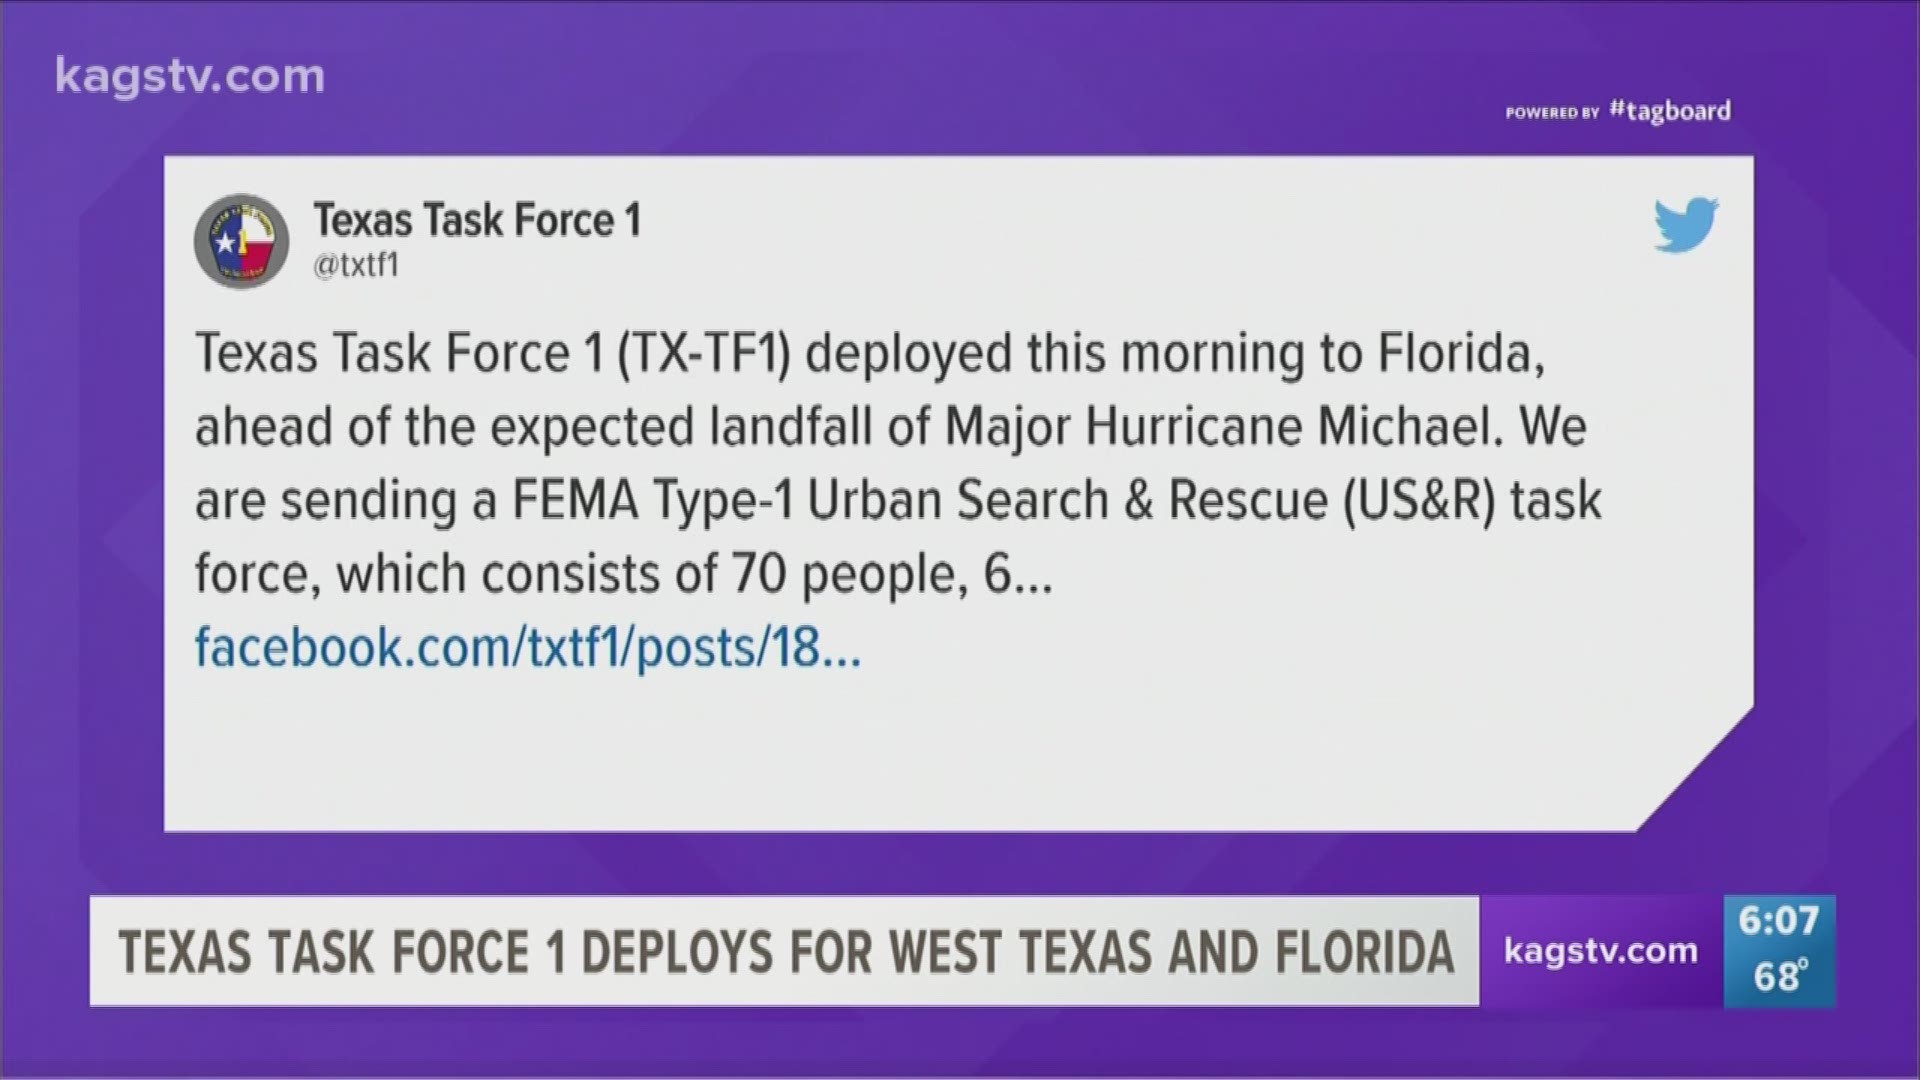 Texas Task Force one helps the search for people in West Texas and deploys to Florida ahead of Hurricane Michael.